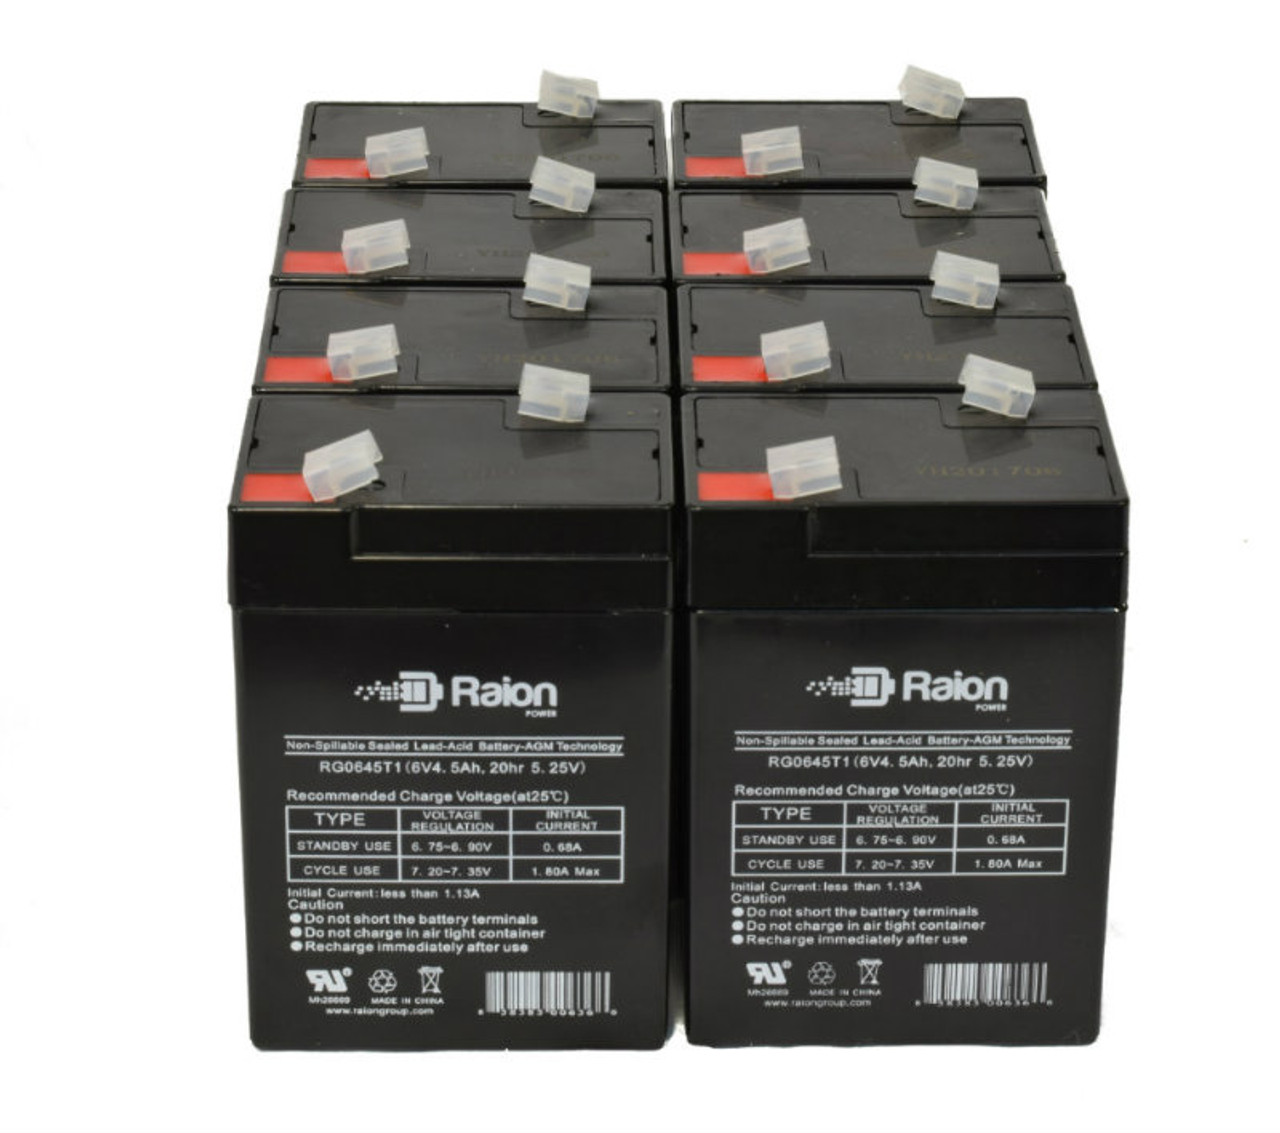 Raion Power RG0645T1 6V 4.5Ah Replacement Medical Equipment Battery for Abbott Laboratories 75 Life Care Breeze - 8 Pack